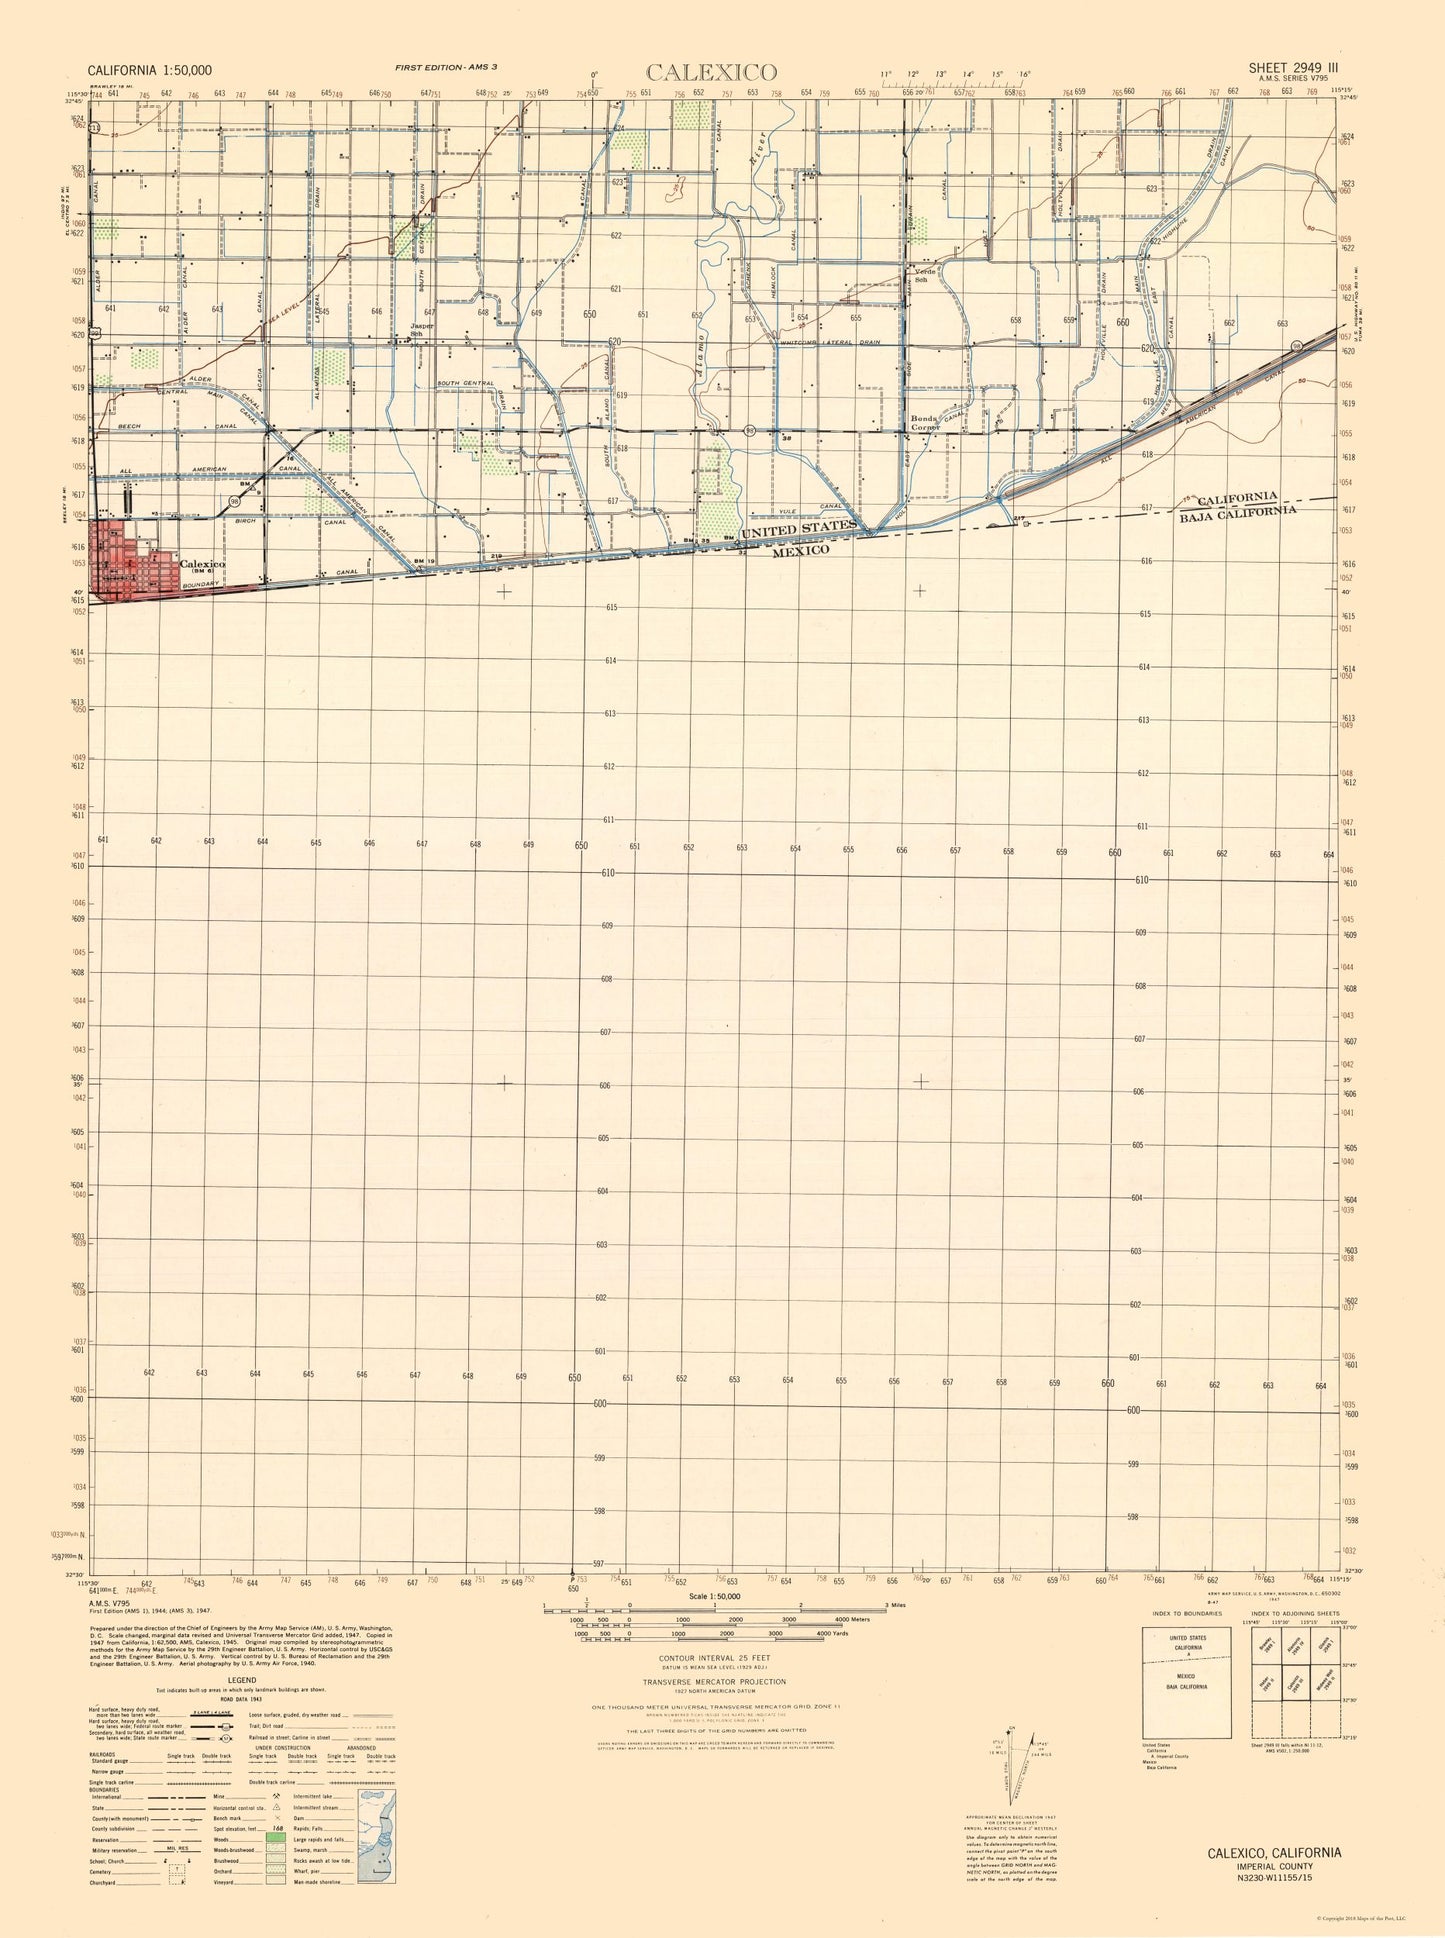 Topographical Map - Calexico Sheet - US Army 1944 - 23 x 30.84 - Vintage Wall Art